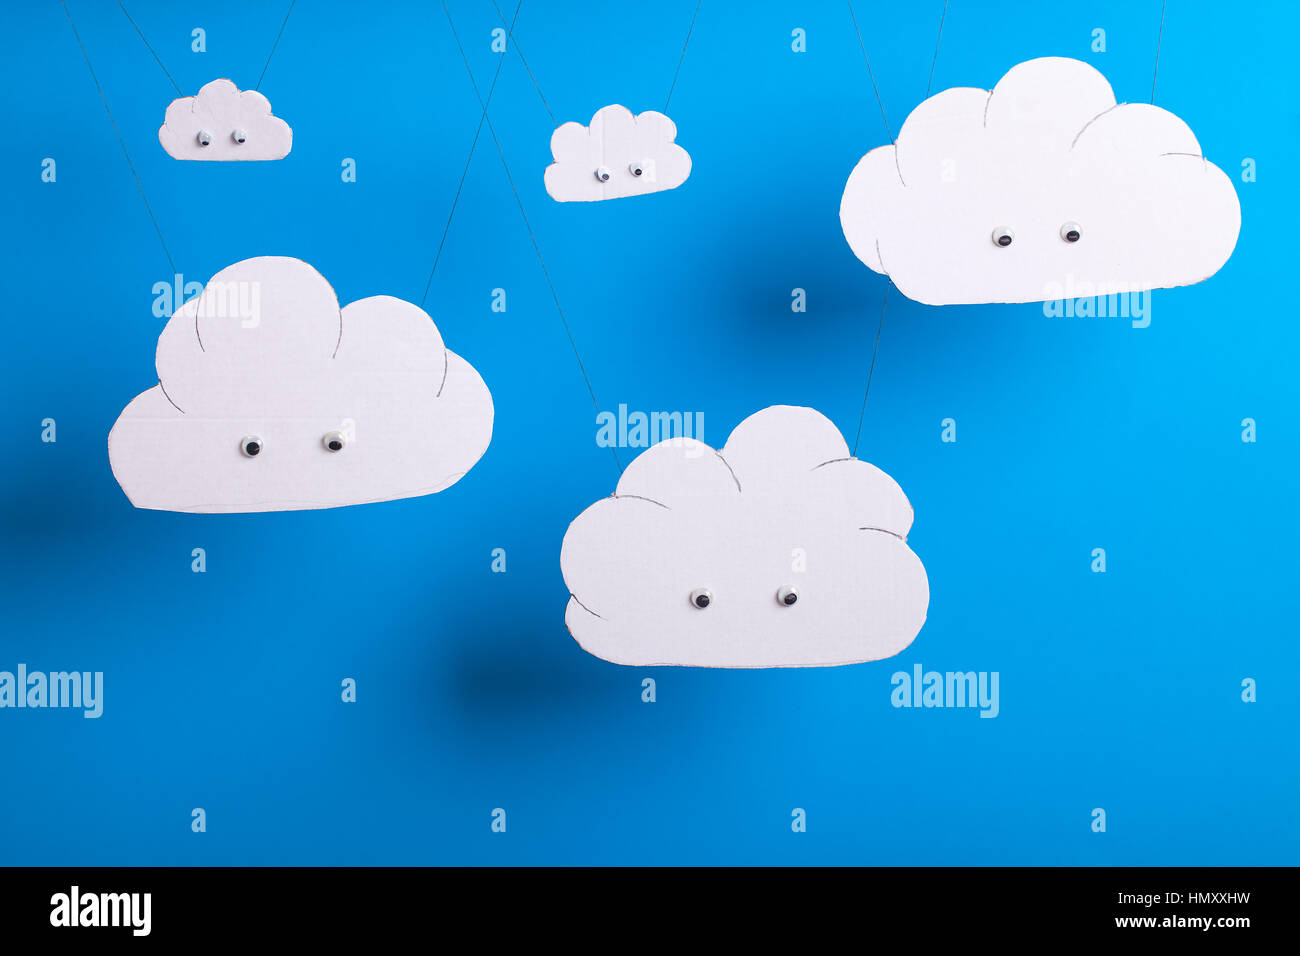 Cloud computing concept with white cardboard cutout cute clouds with eyes hanging in front of a sky blue background. Stock Photo